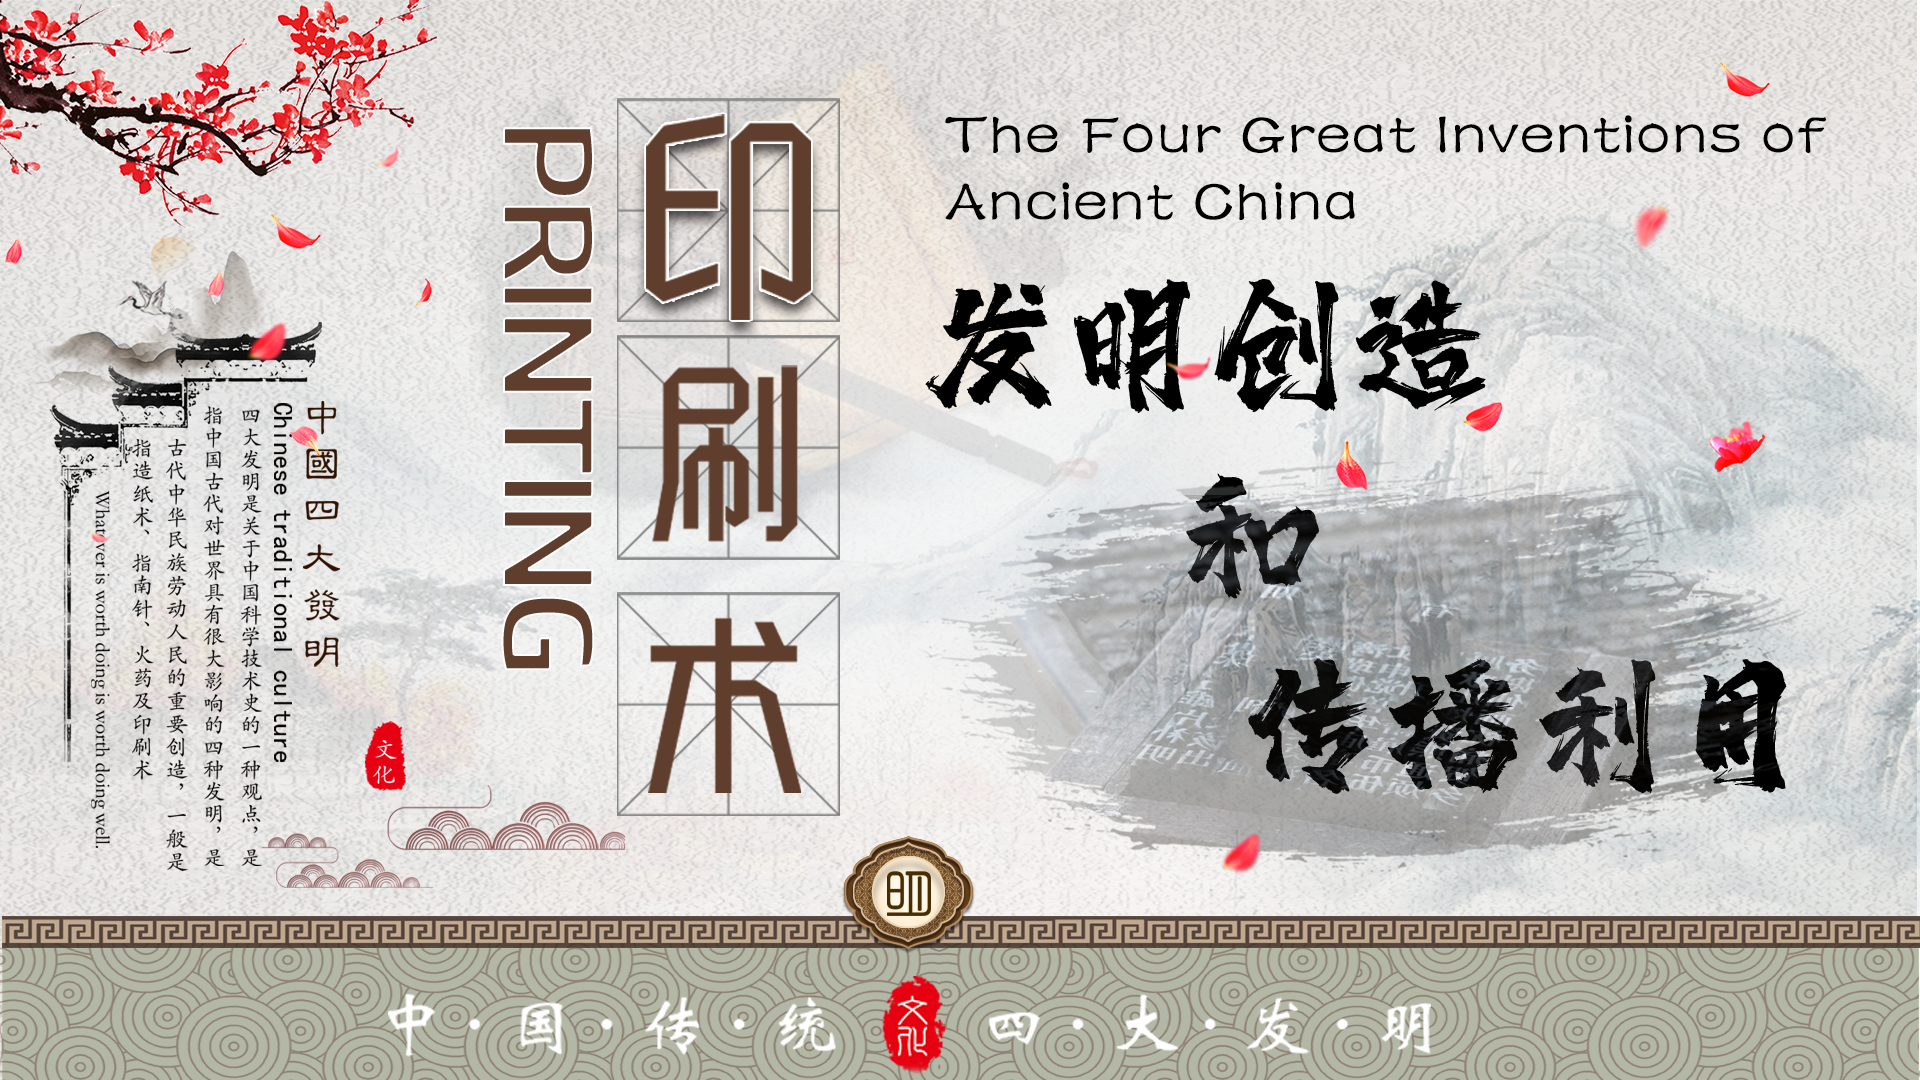 One of the Four Great Inventions of Ancient China: Printing